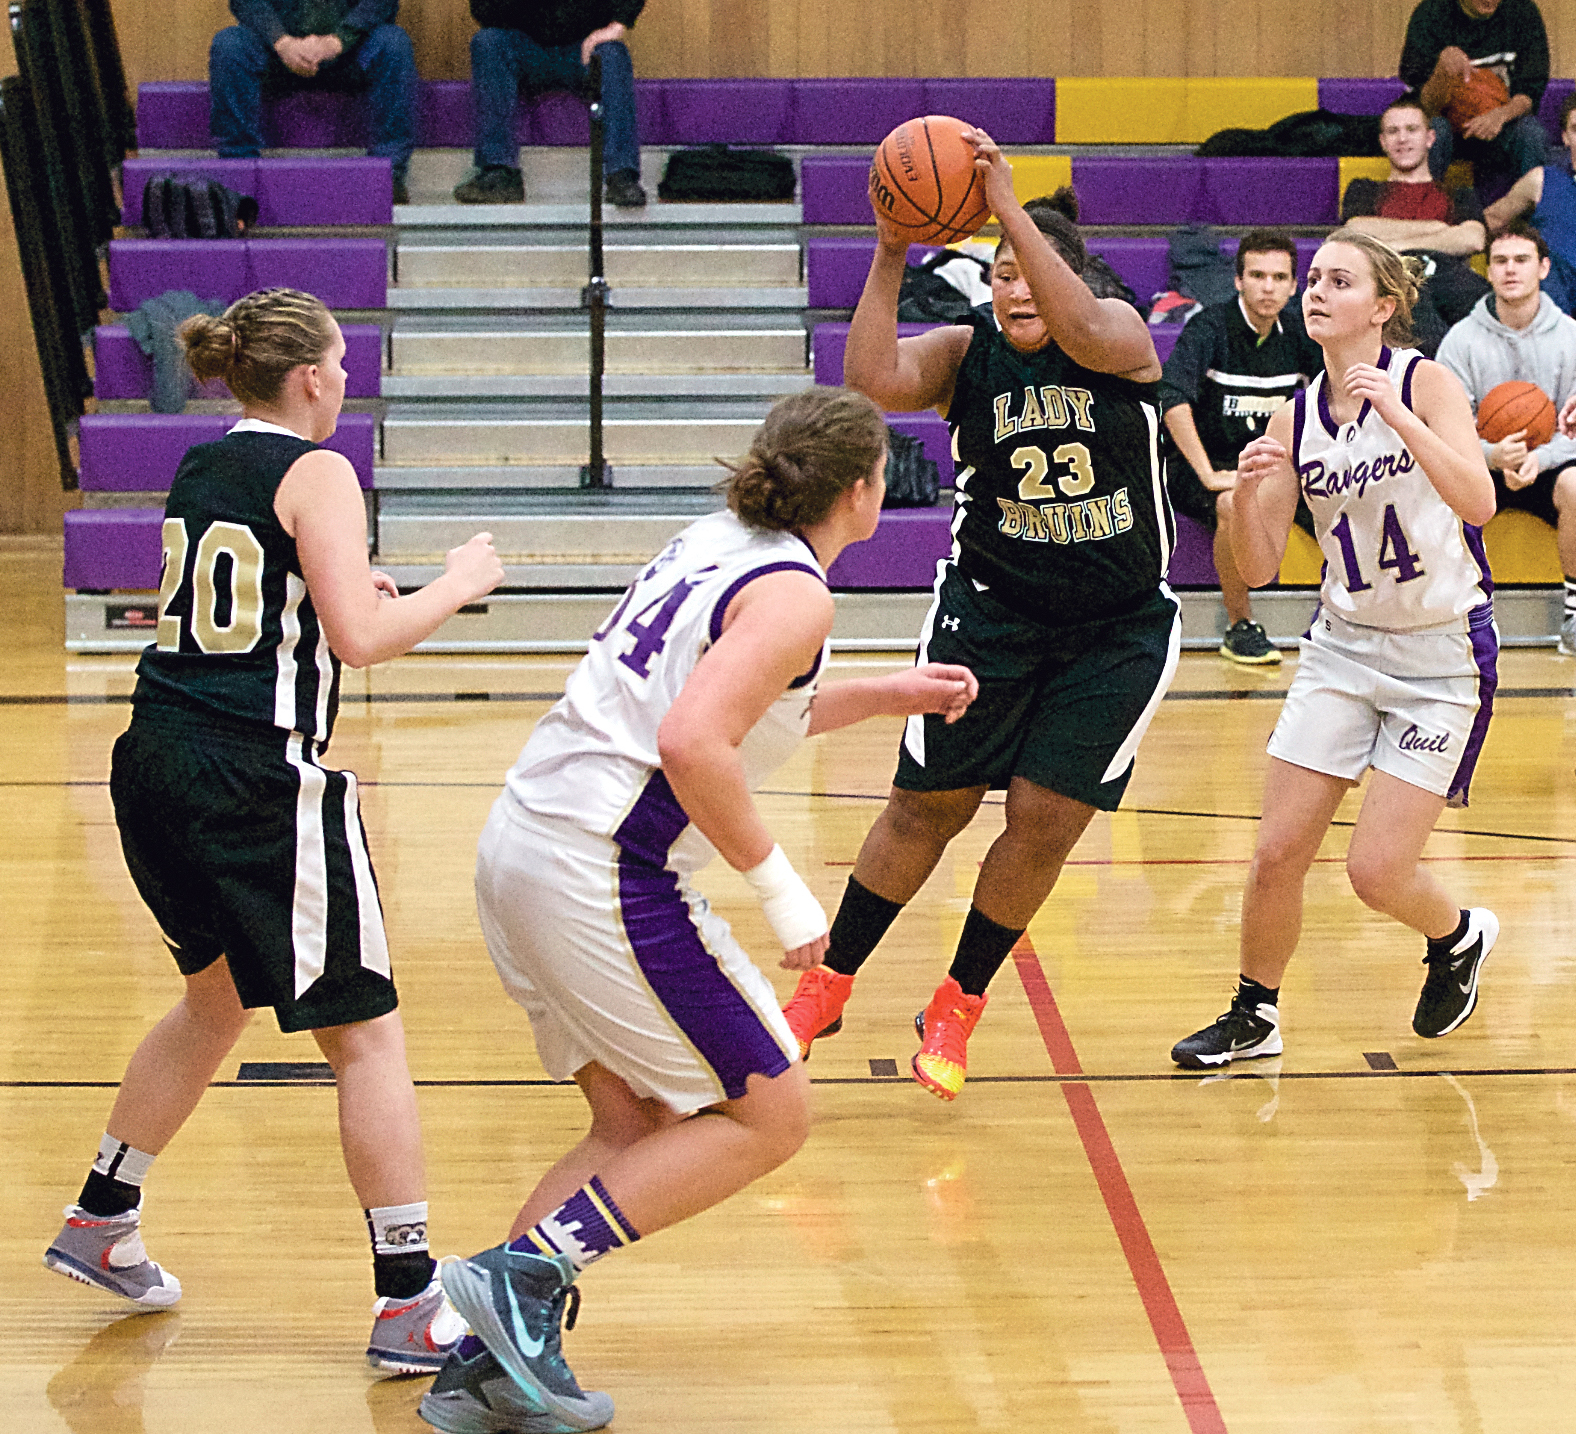 Clallam Bay's Zeria Signor (23) goes for the basket while being defended by Quilcene's Sammy Rae (34) and Katie Love (14)